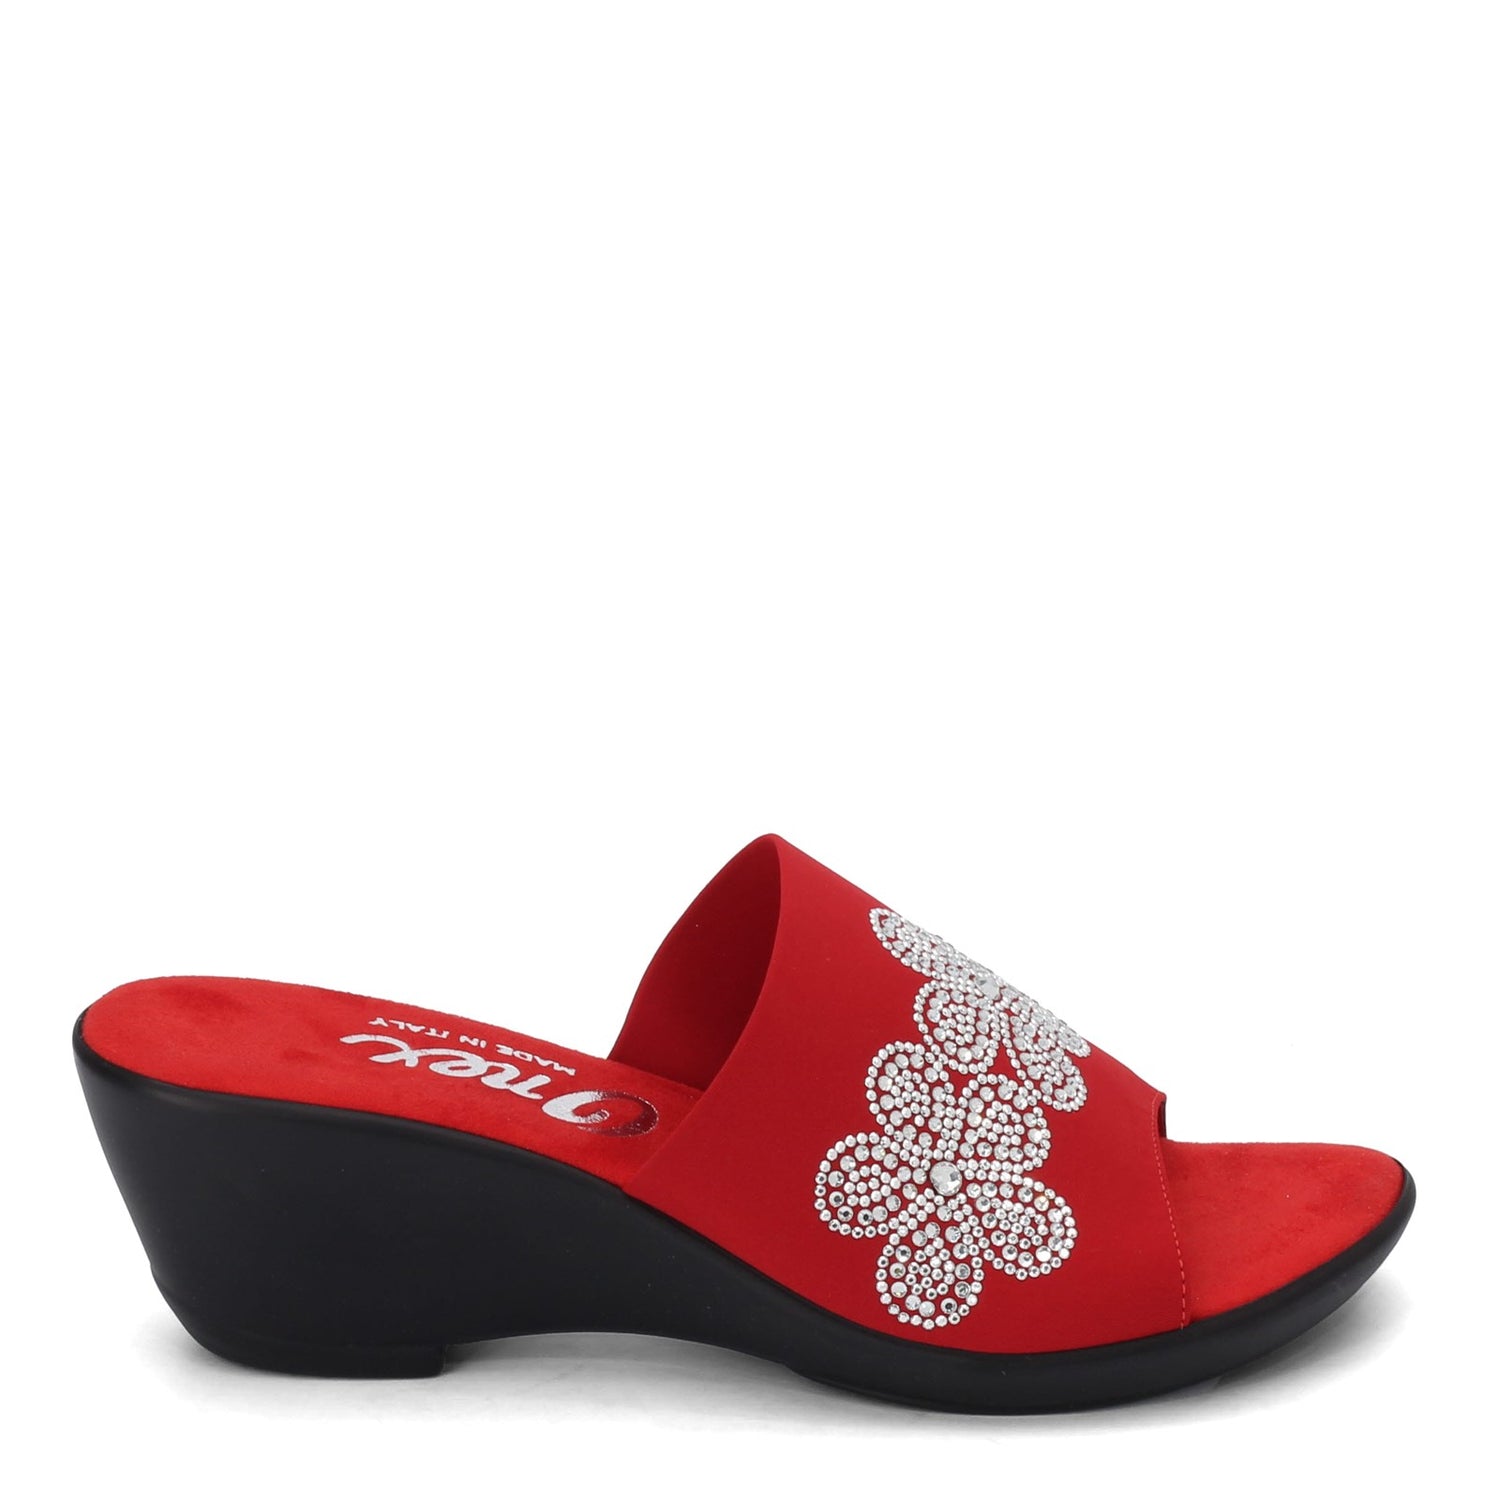 Peltz Shoes  Women's Onex Rory Sandal RED RORY-RED